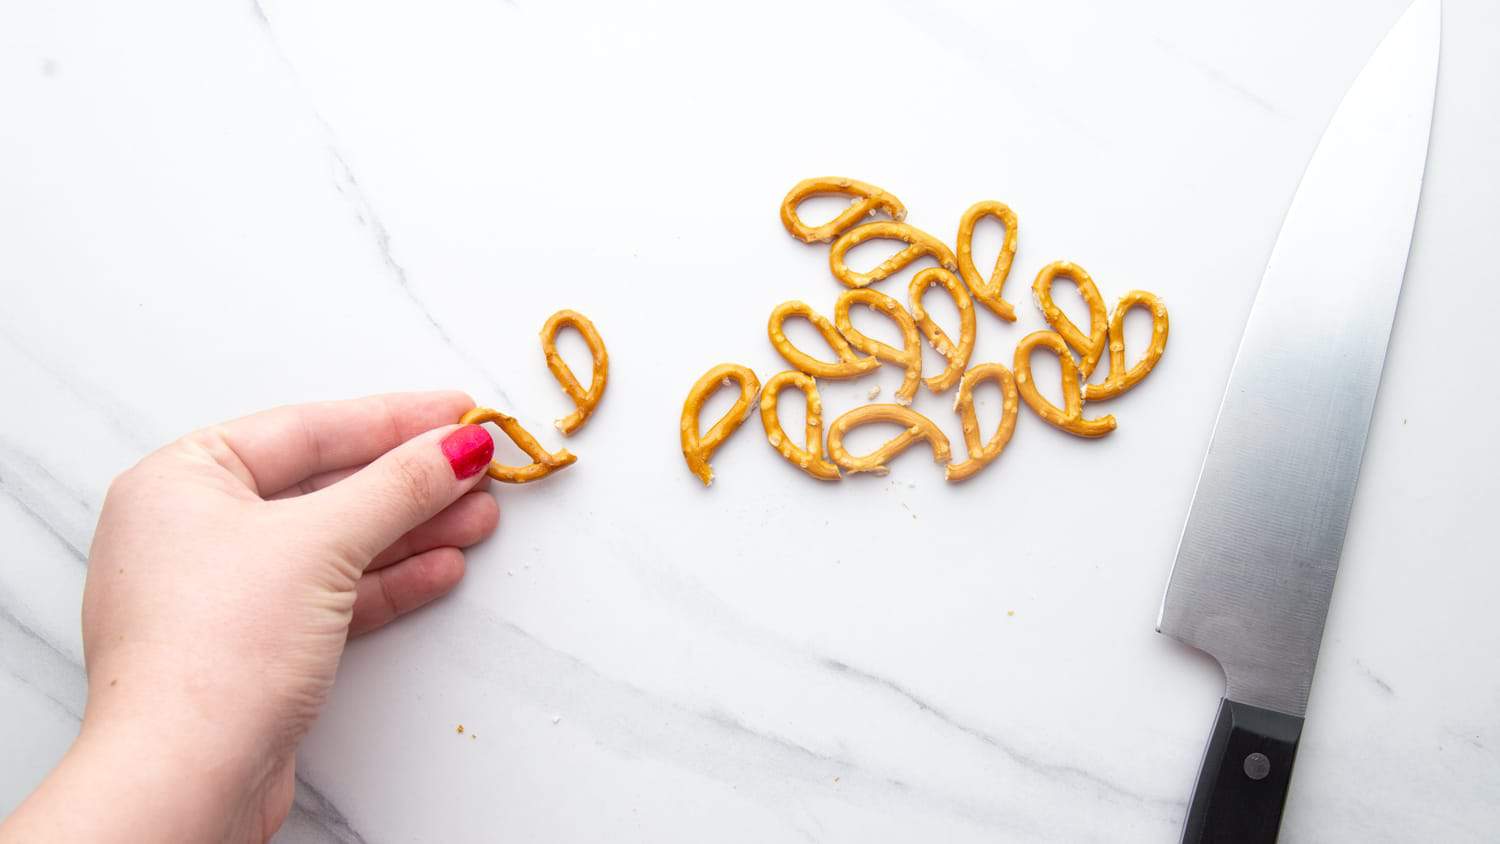 Cutting pretzels with a knife to create reindeer antlers